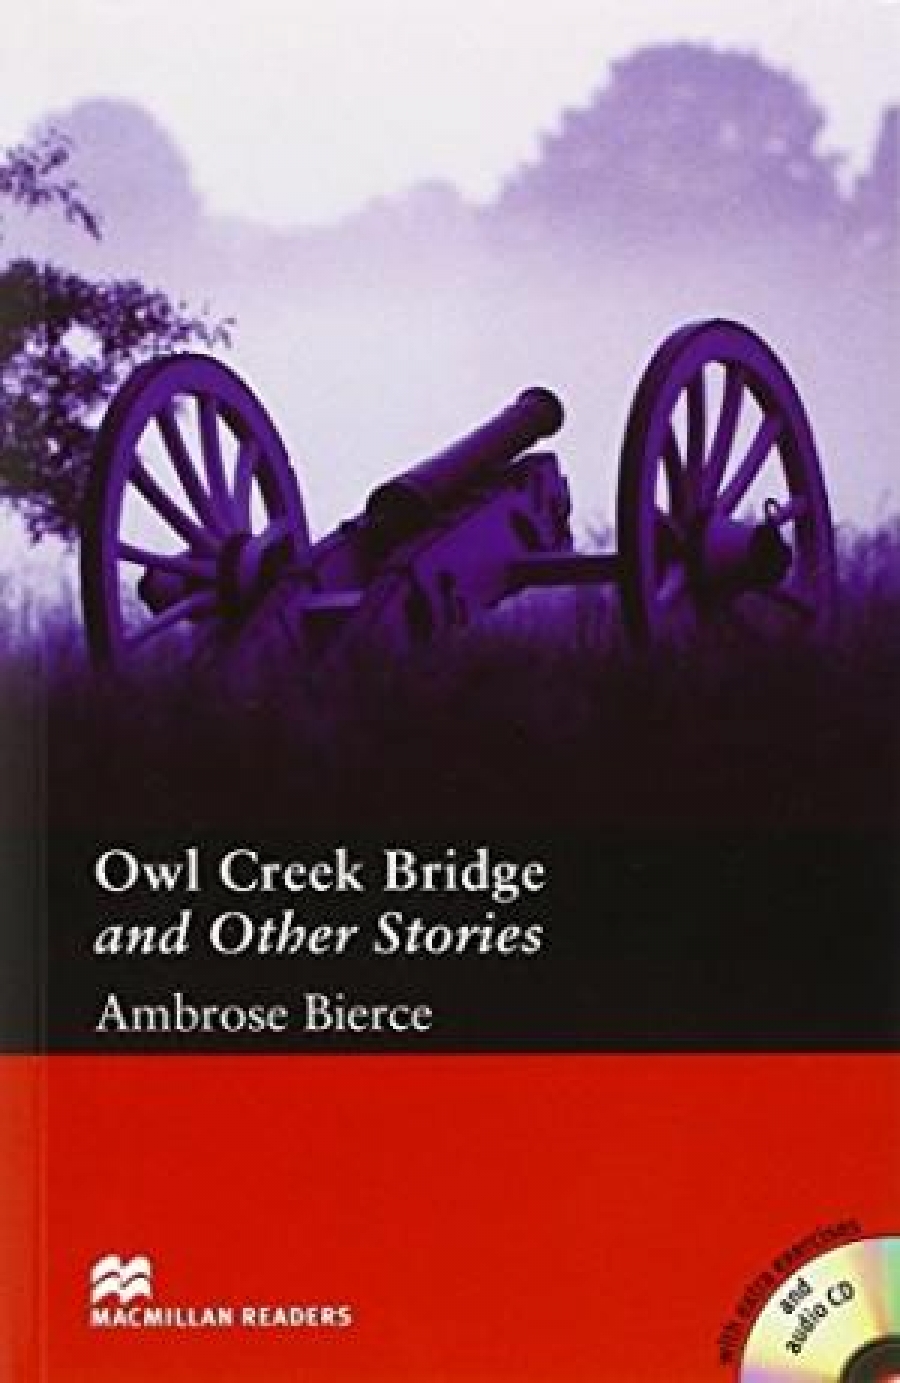 Ambrose Bierce, retold by Stephen Colbourn Owl Creek Bridge and Other Stories (with Audio CD) 